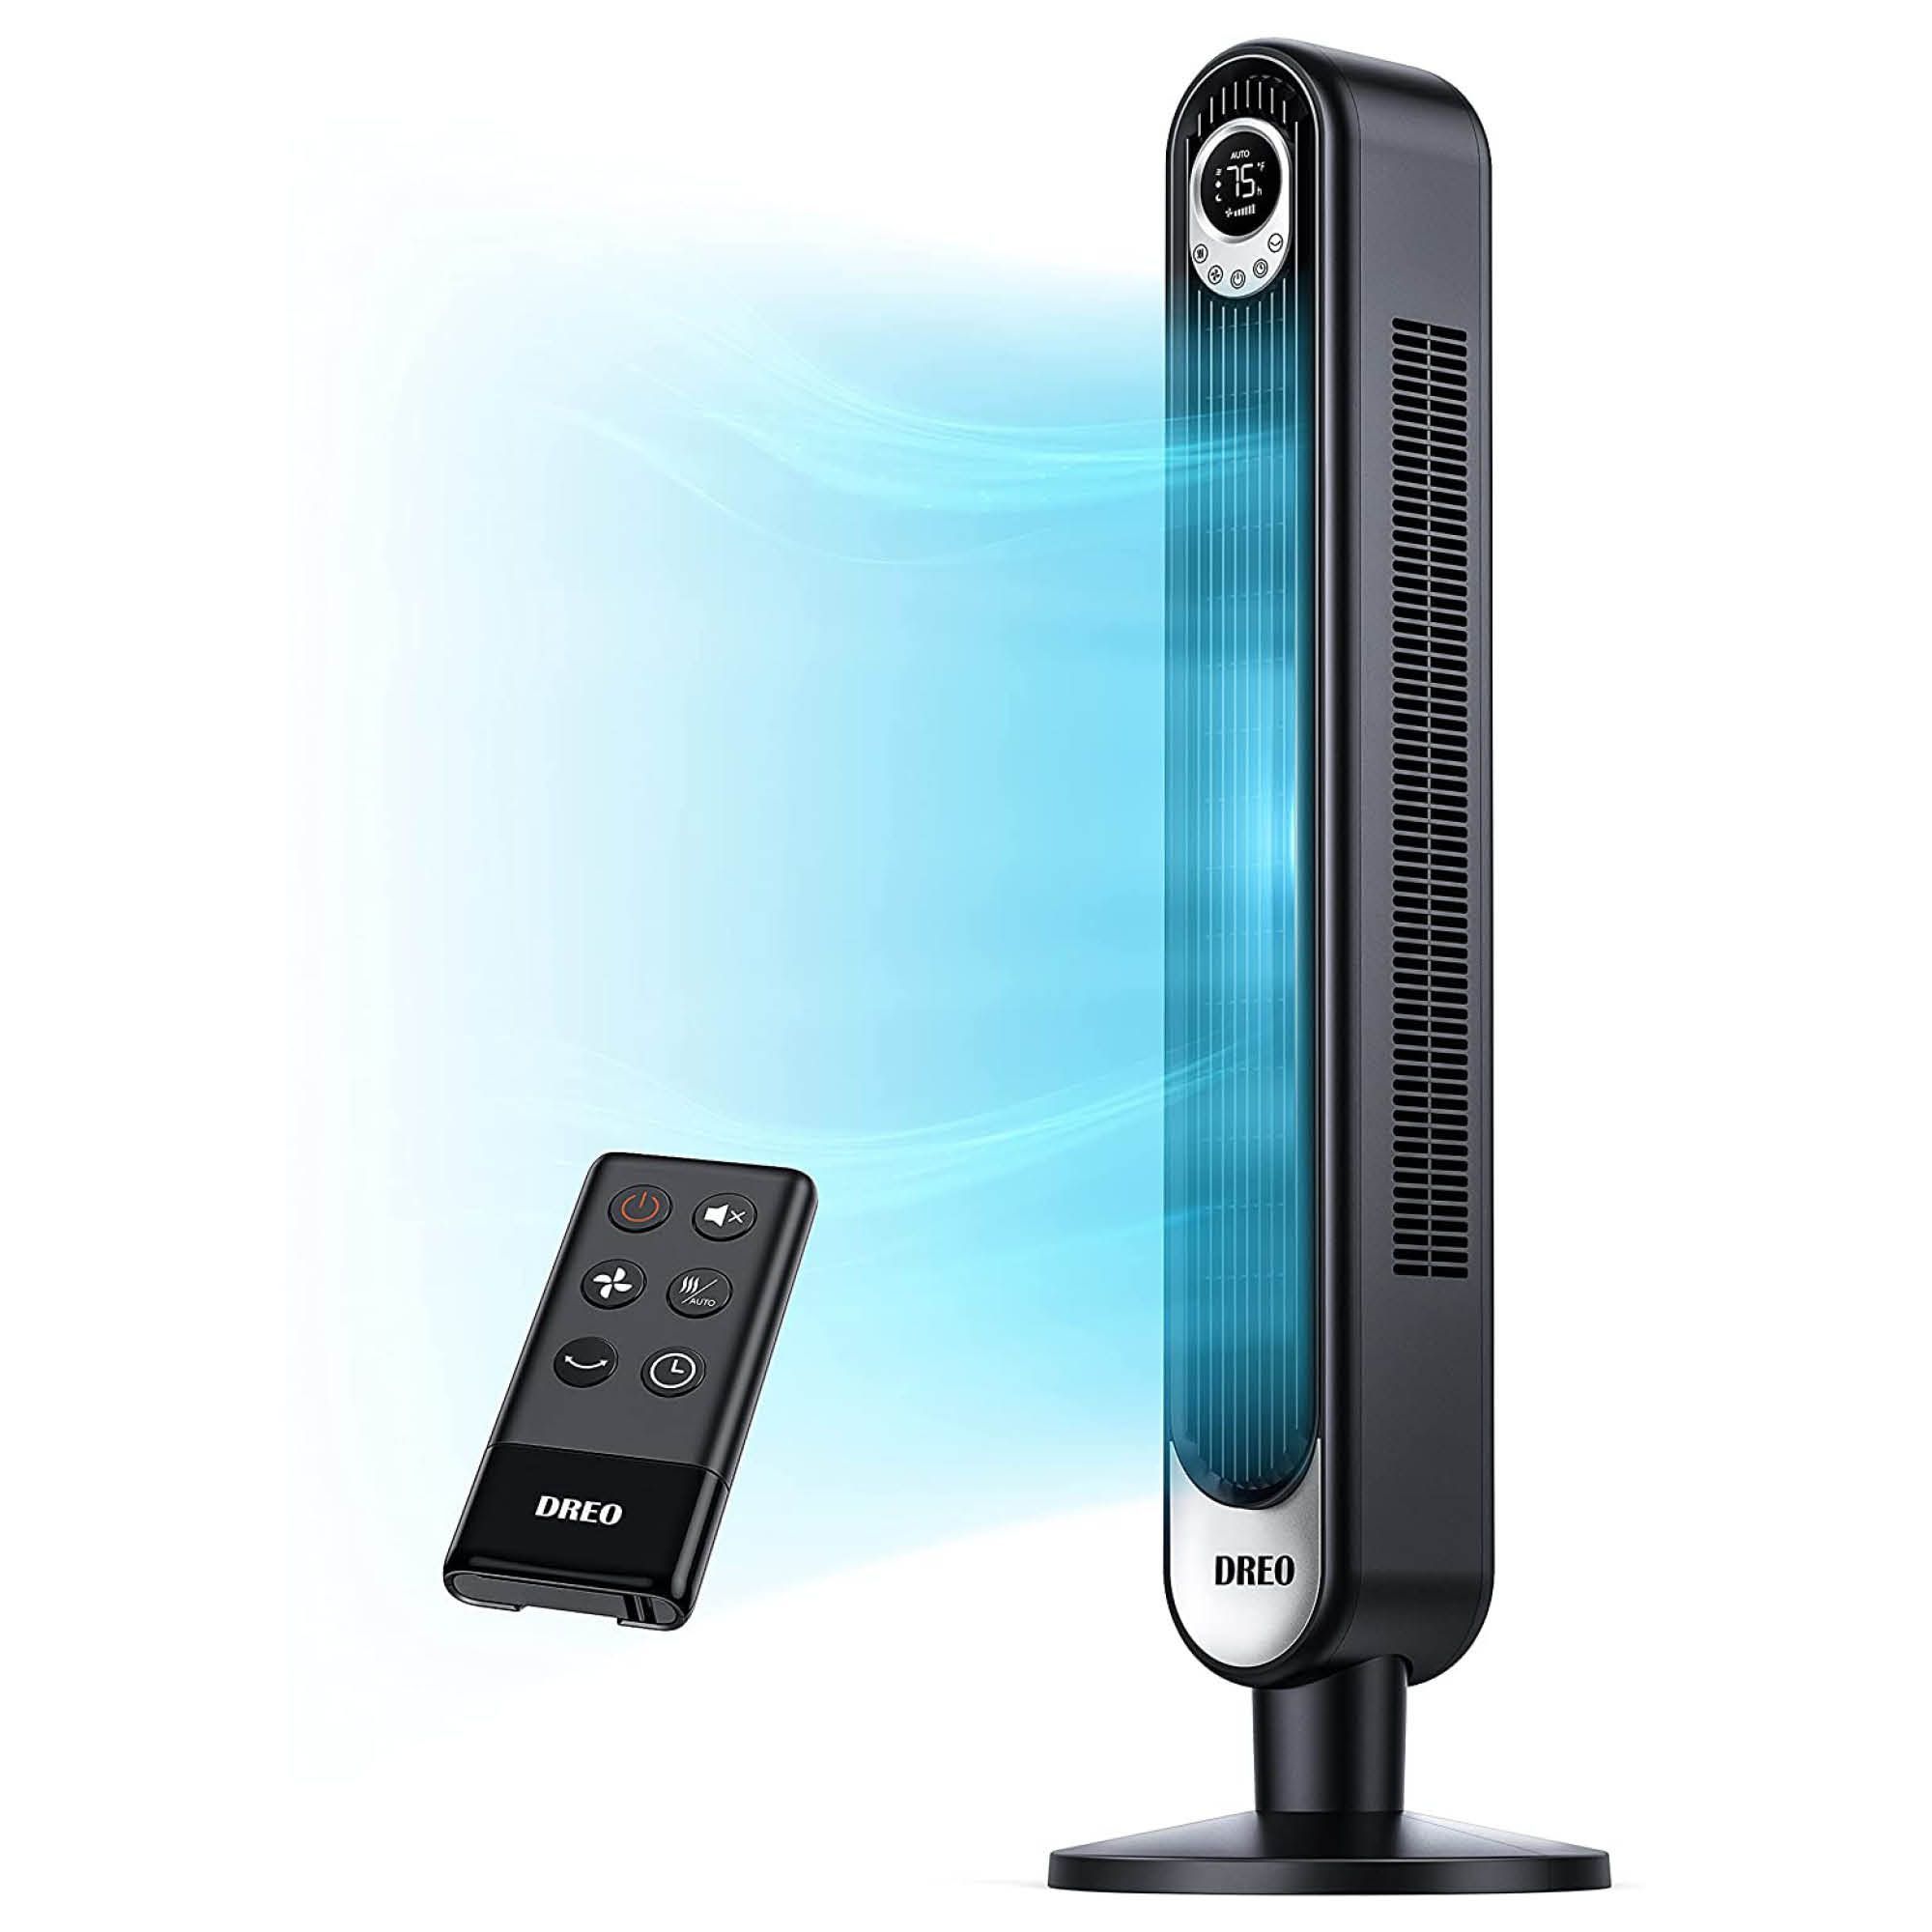 Bladeless Fans Cooling Silent Quiet Standing Tower Bladeless Fans For Bedroom Home Remote Control Led Digital Display Eight Speeds Energy Saving Cool And Refreshing Suitable For All Seasons Yellow 